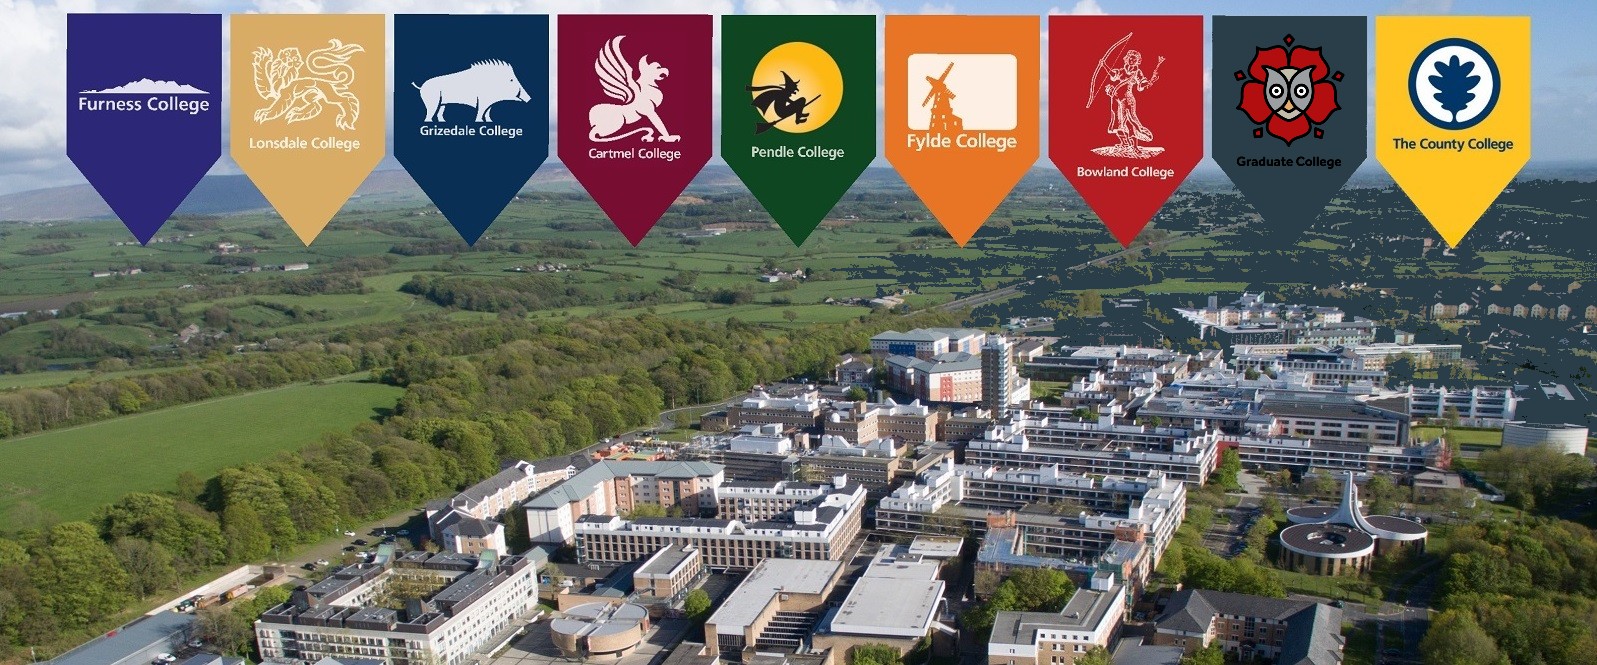 College shields are displayed over an aerial photos of the campus.